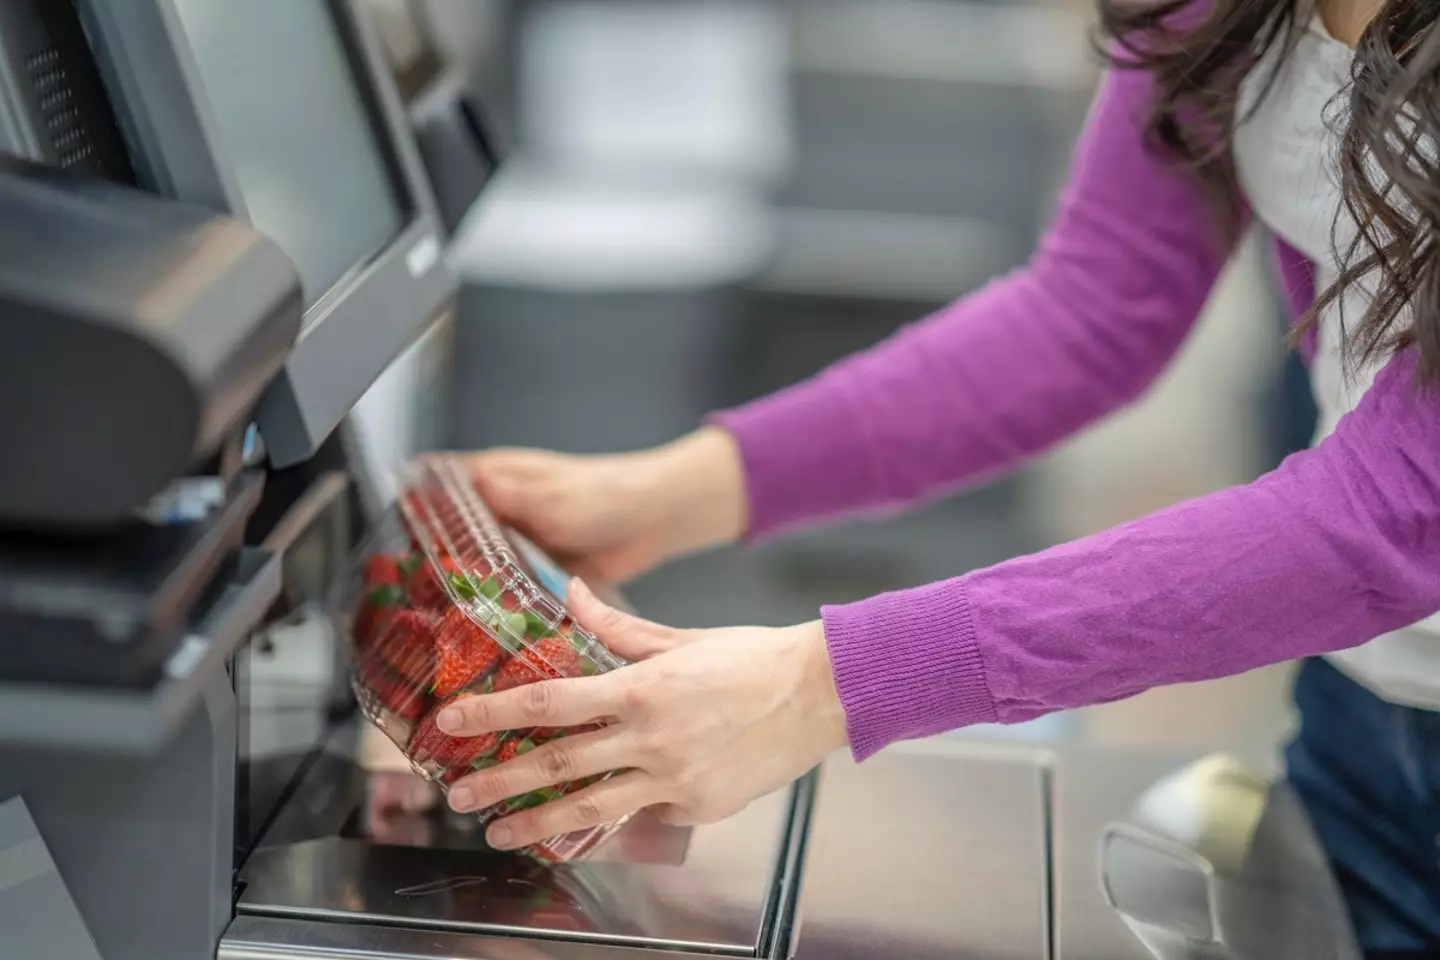 The lawyers warned the self-checkout 'trick' is a form of theft.